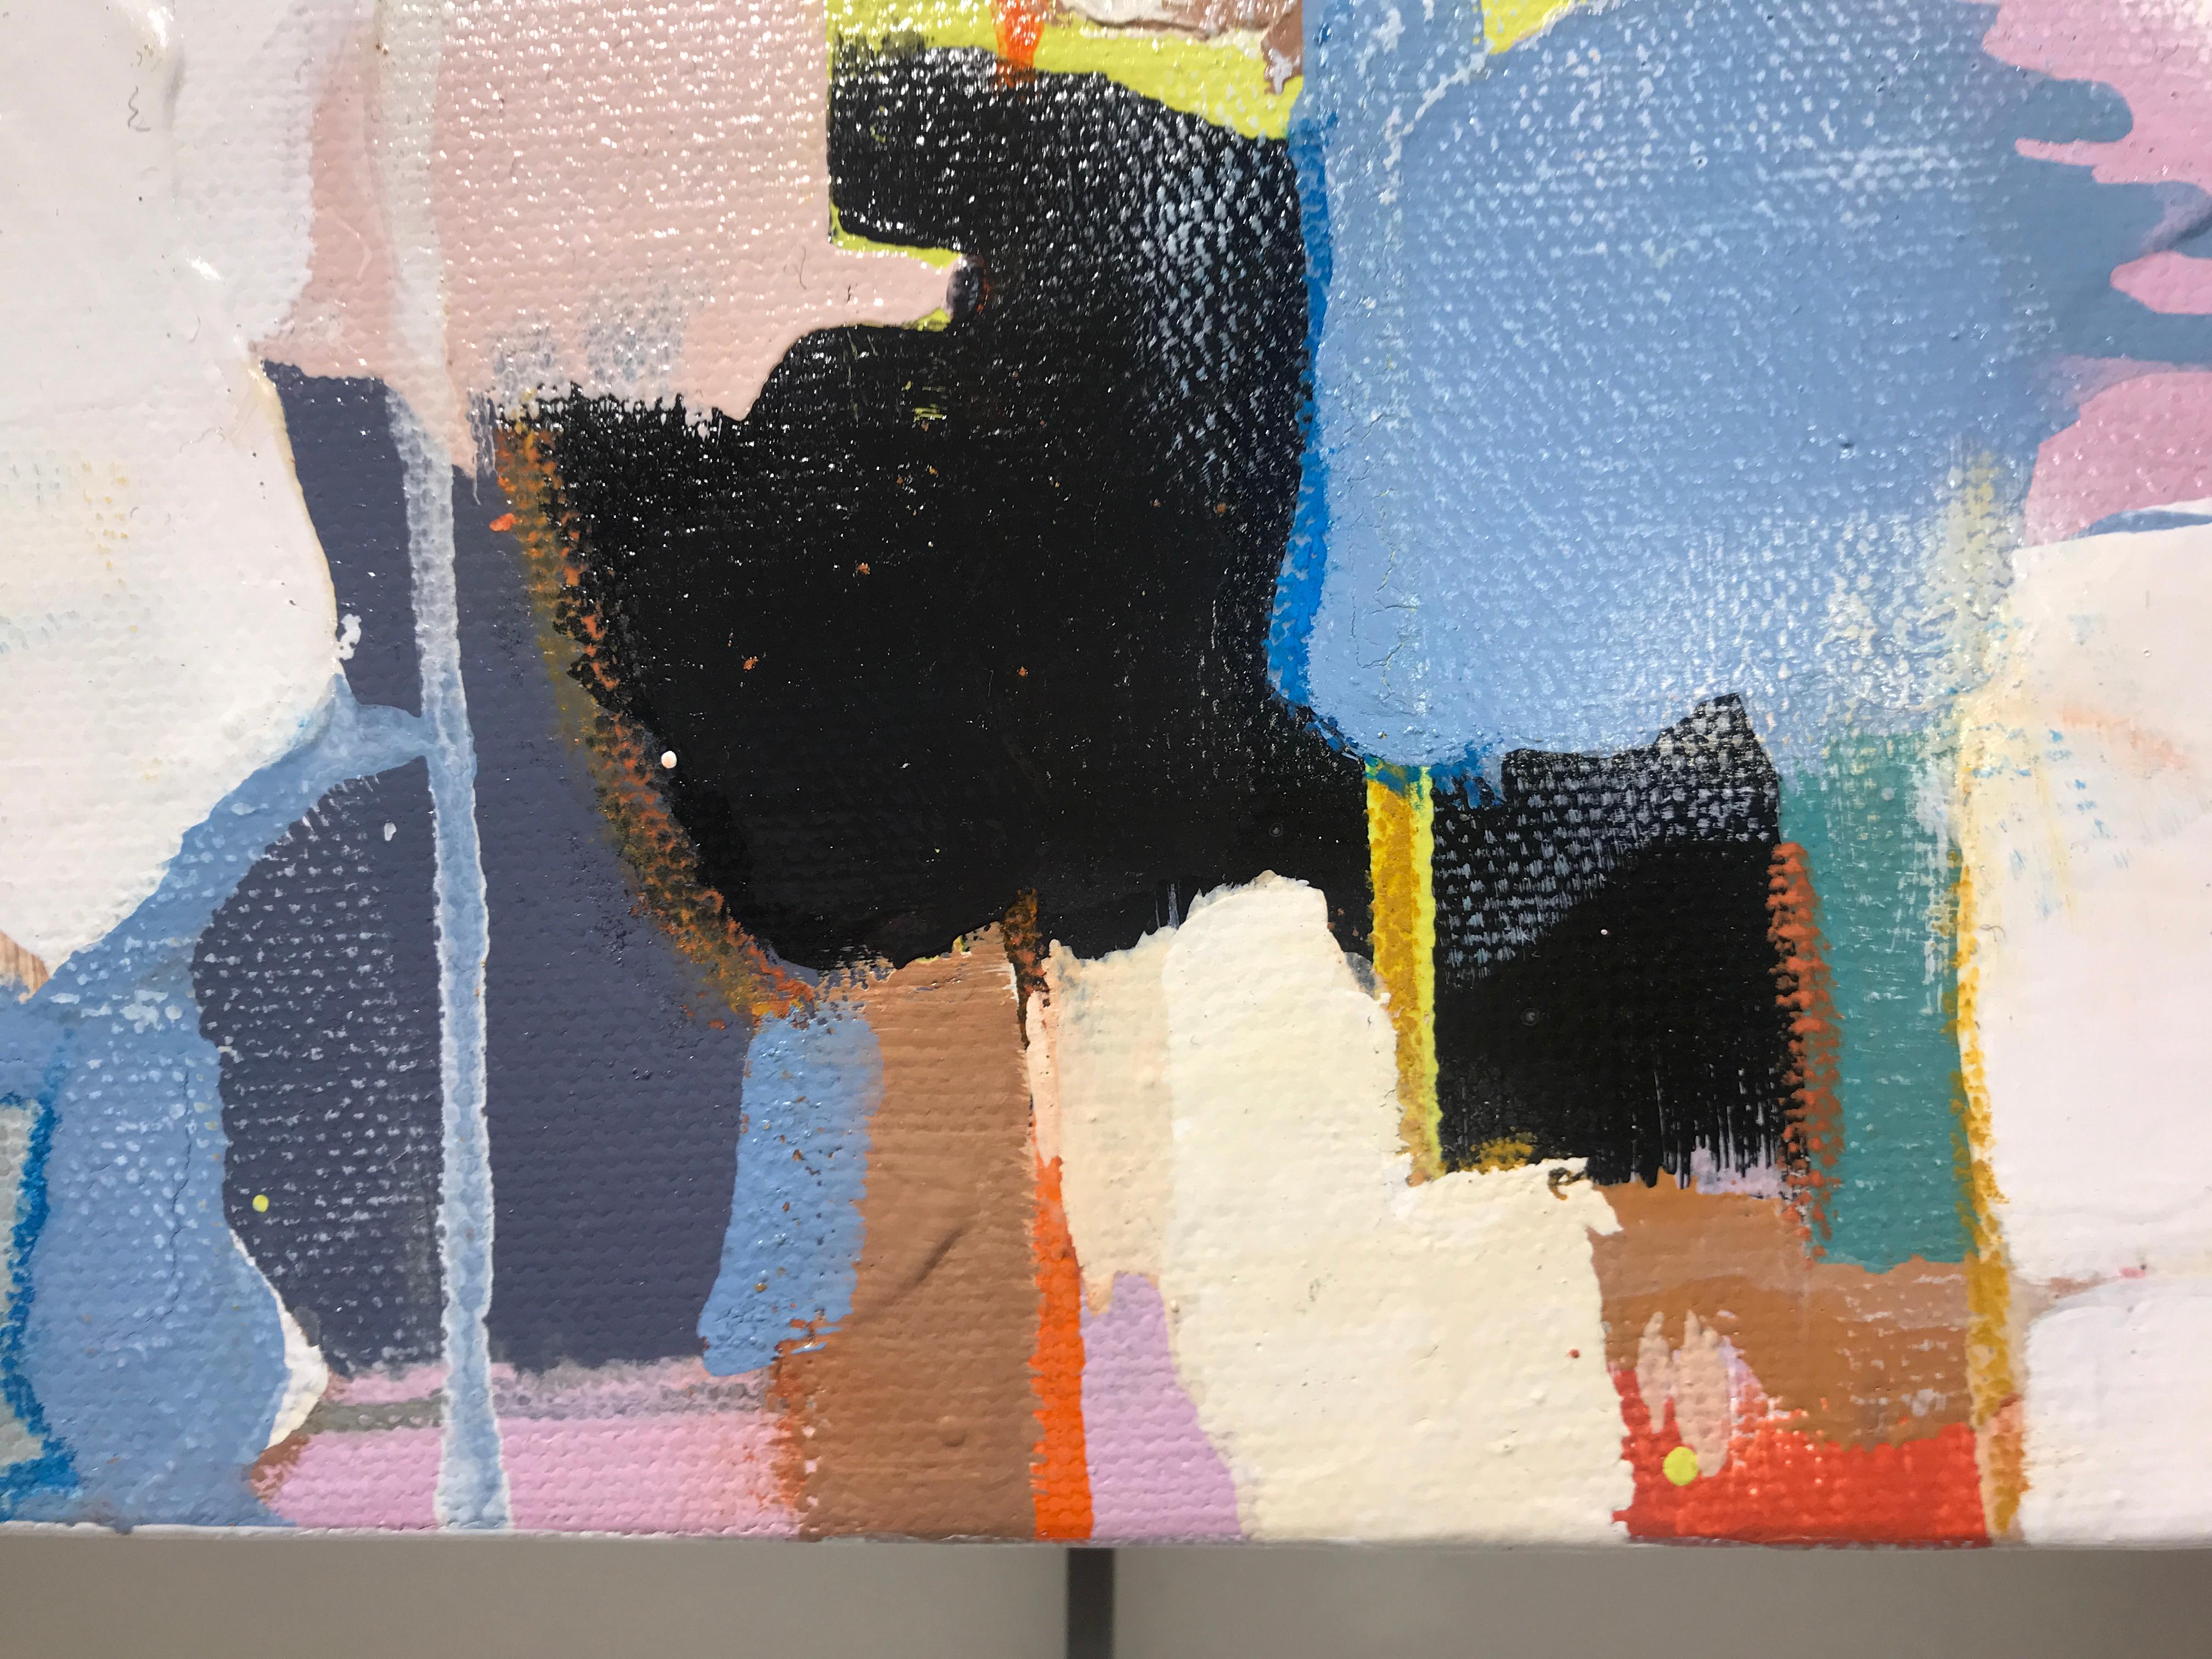 'Abstracted 15' is a small abstract charcoal and acrylic on canvas painting created by American artist Annie King is 2018. Featuring a palette made of white, cream, blue, black and yellow colors accented with touches of red, orange and teal tones